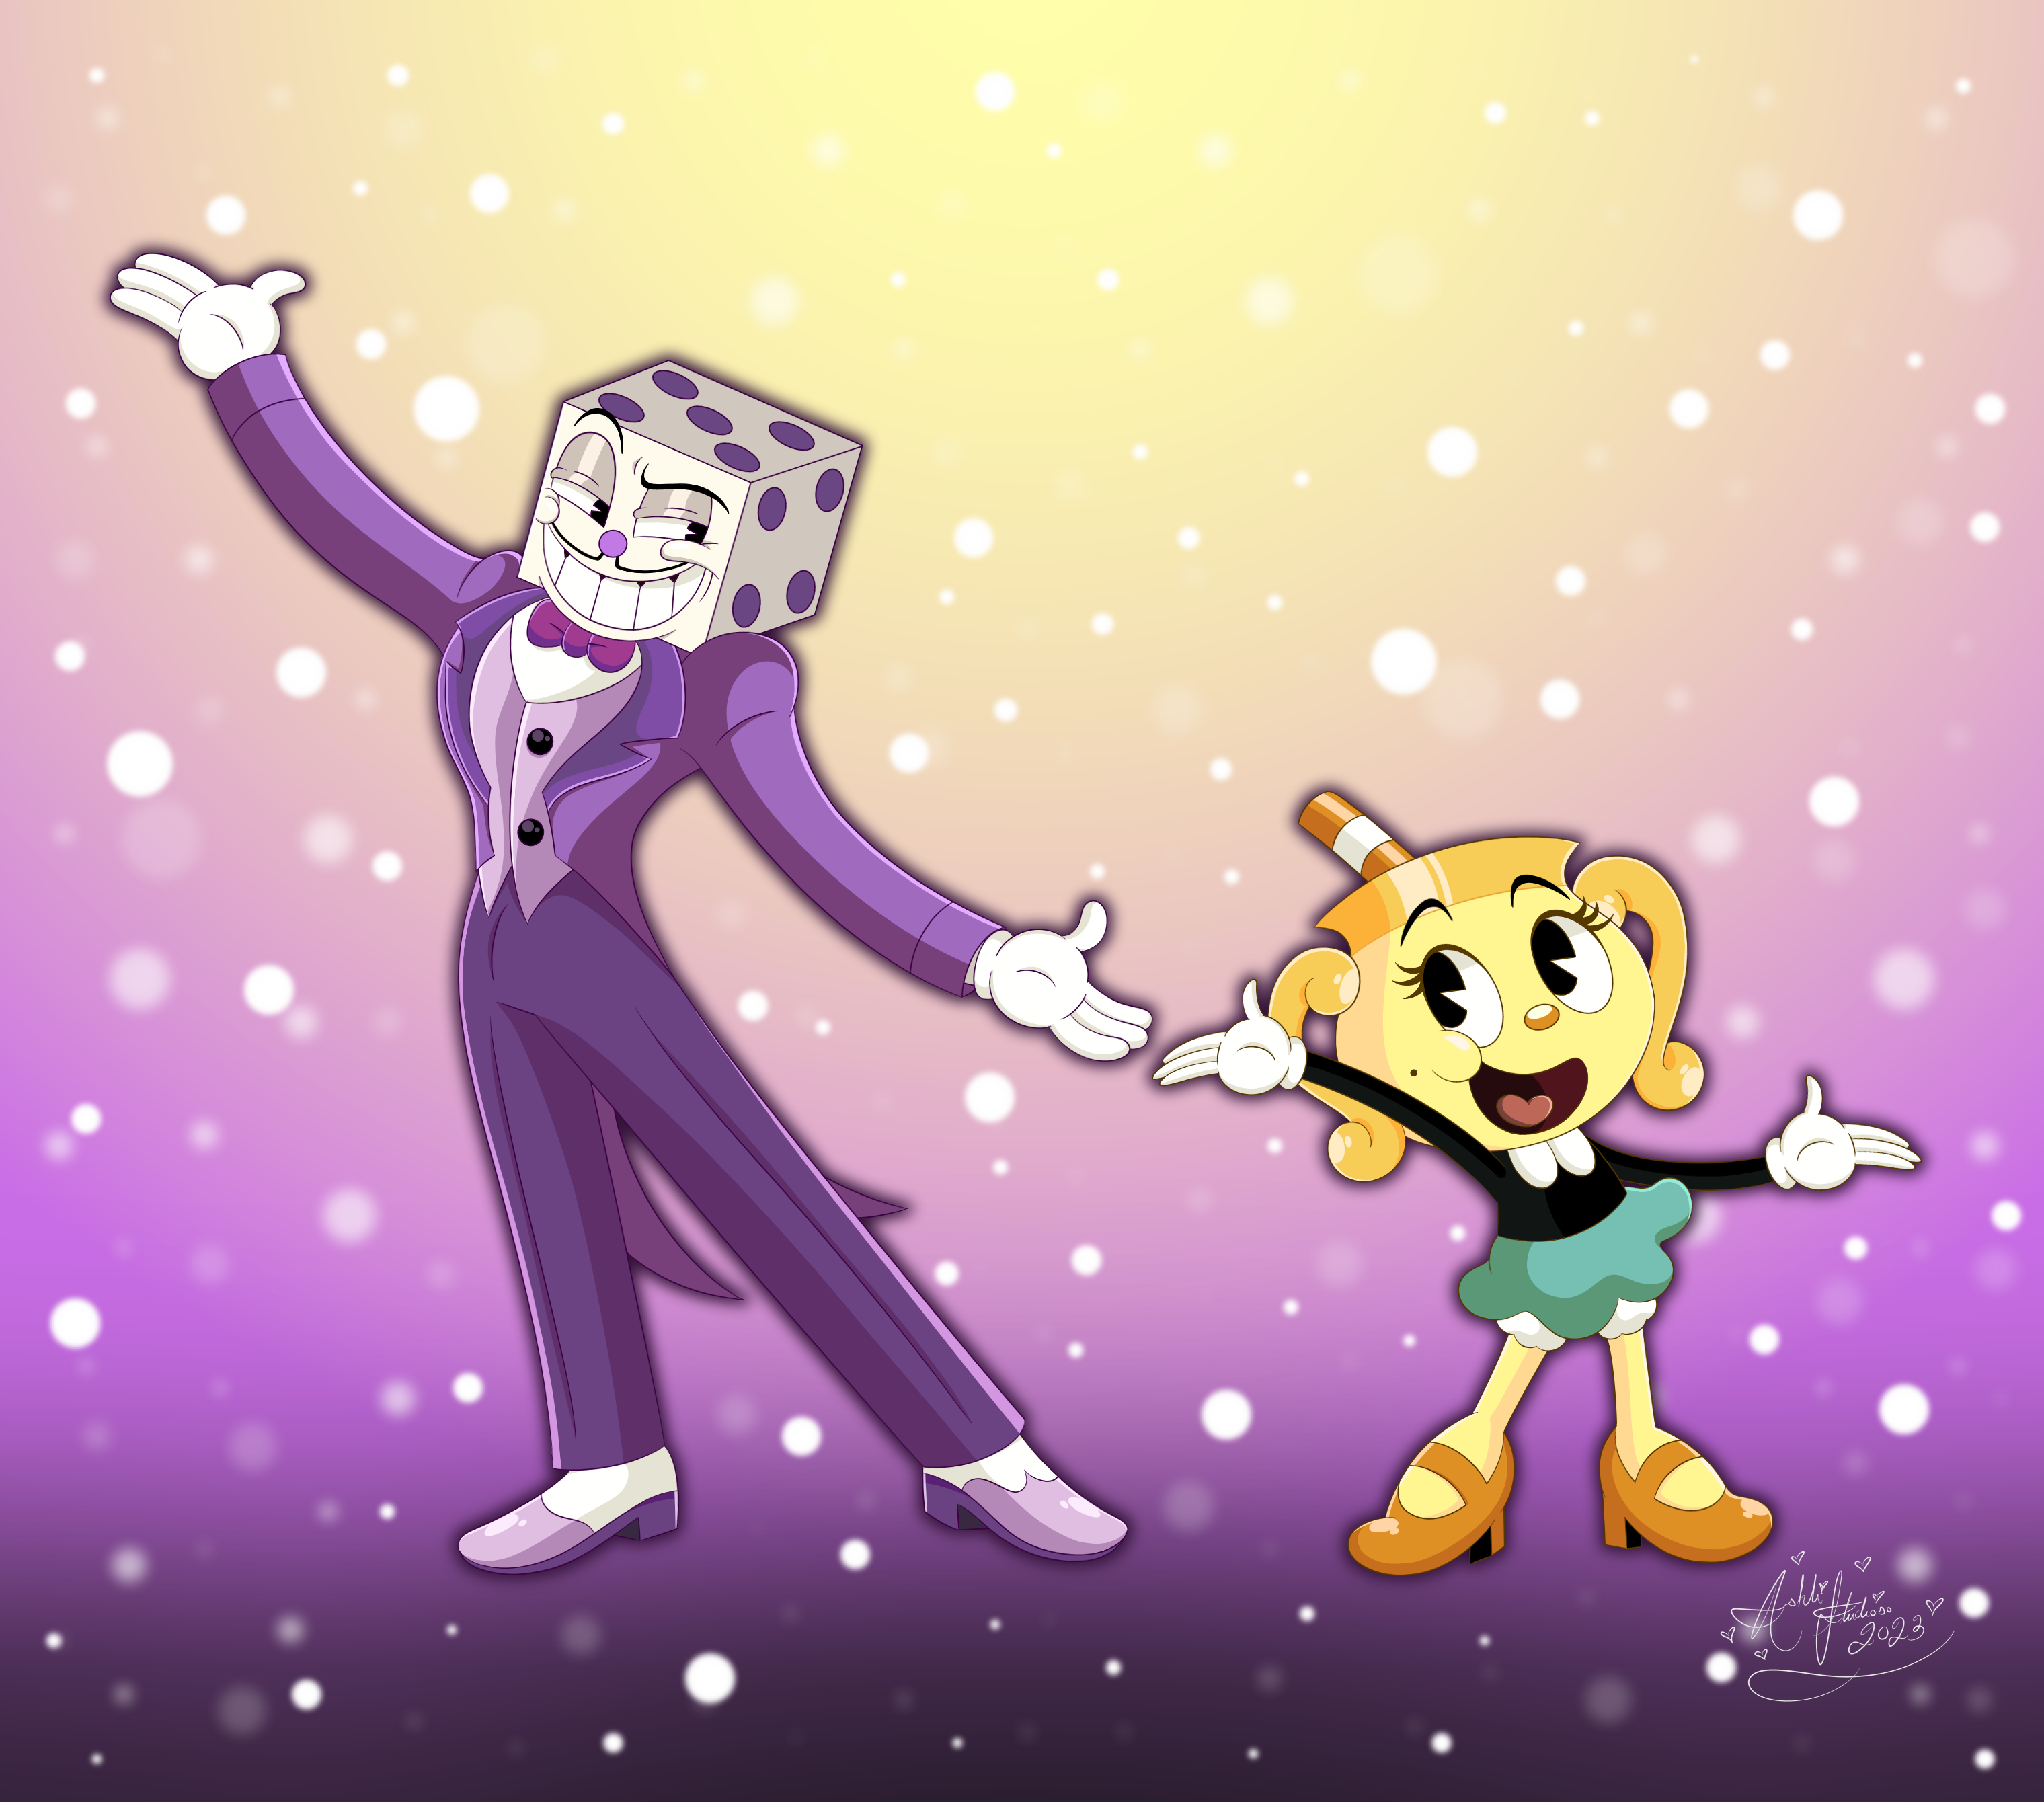 I want you to meet Queen Dice, the love interest of King Dice